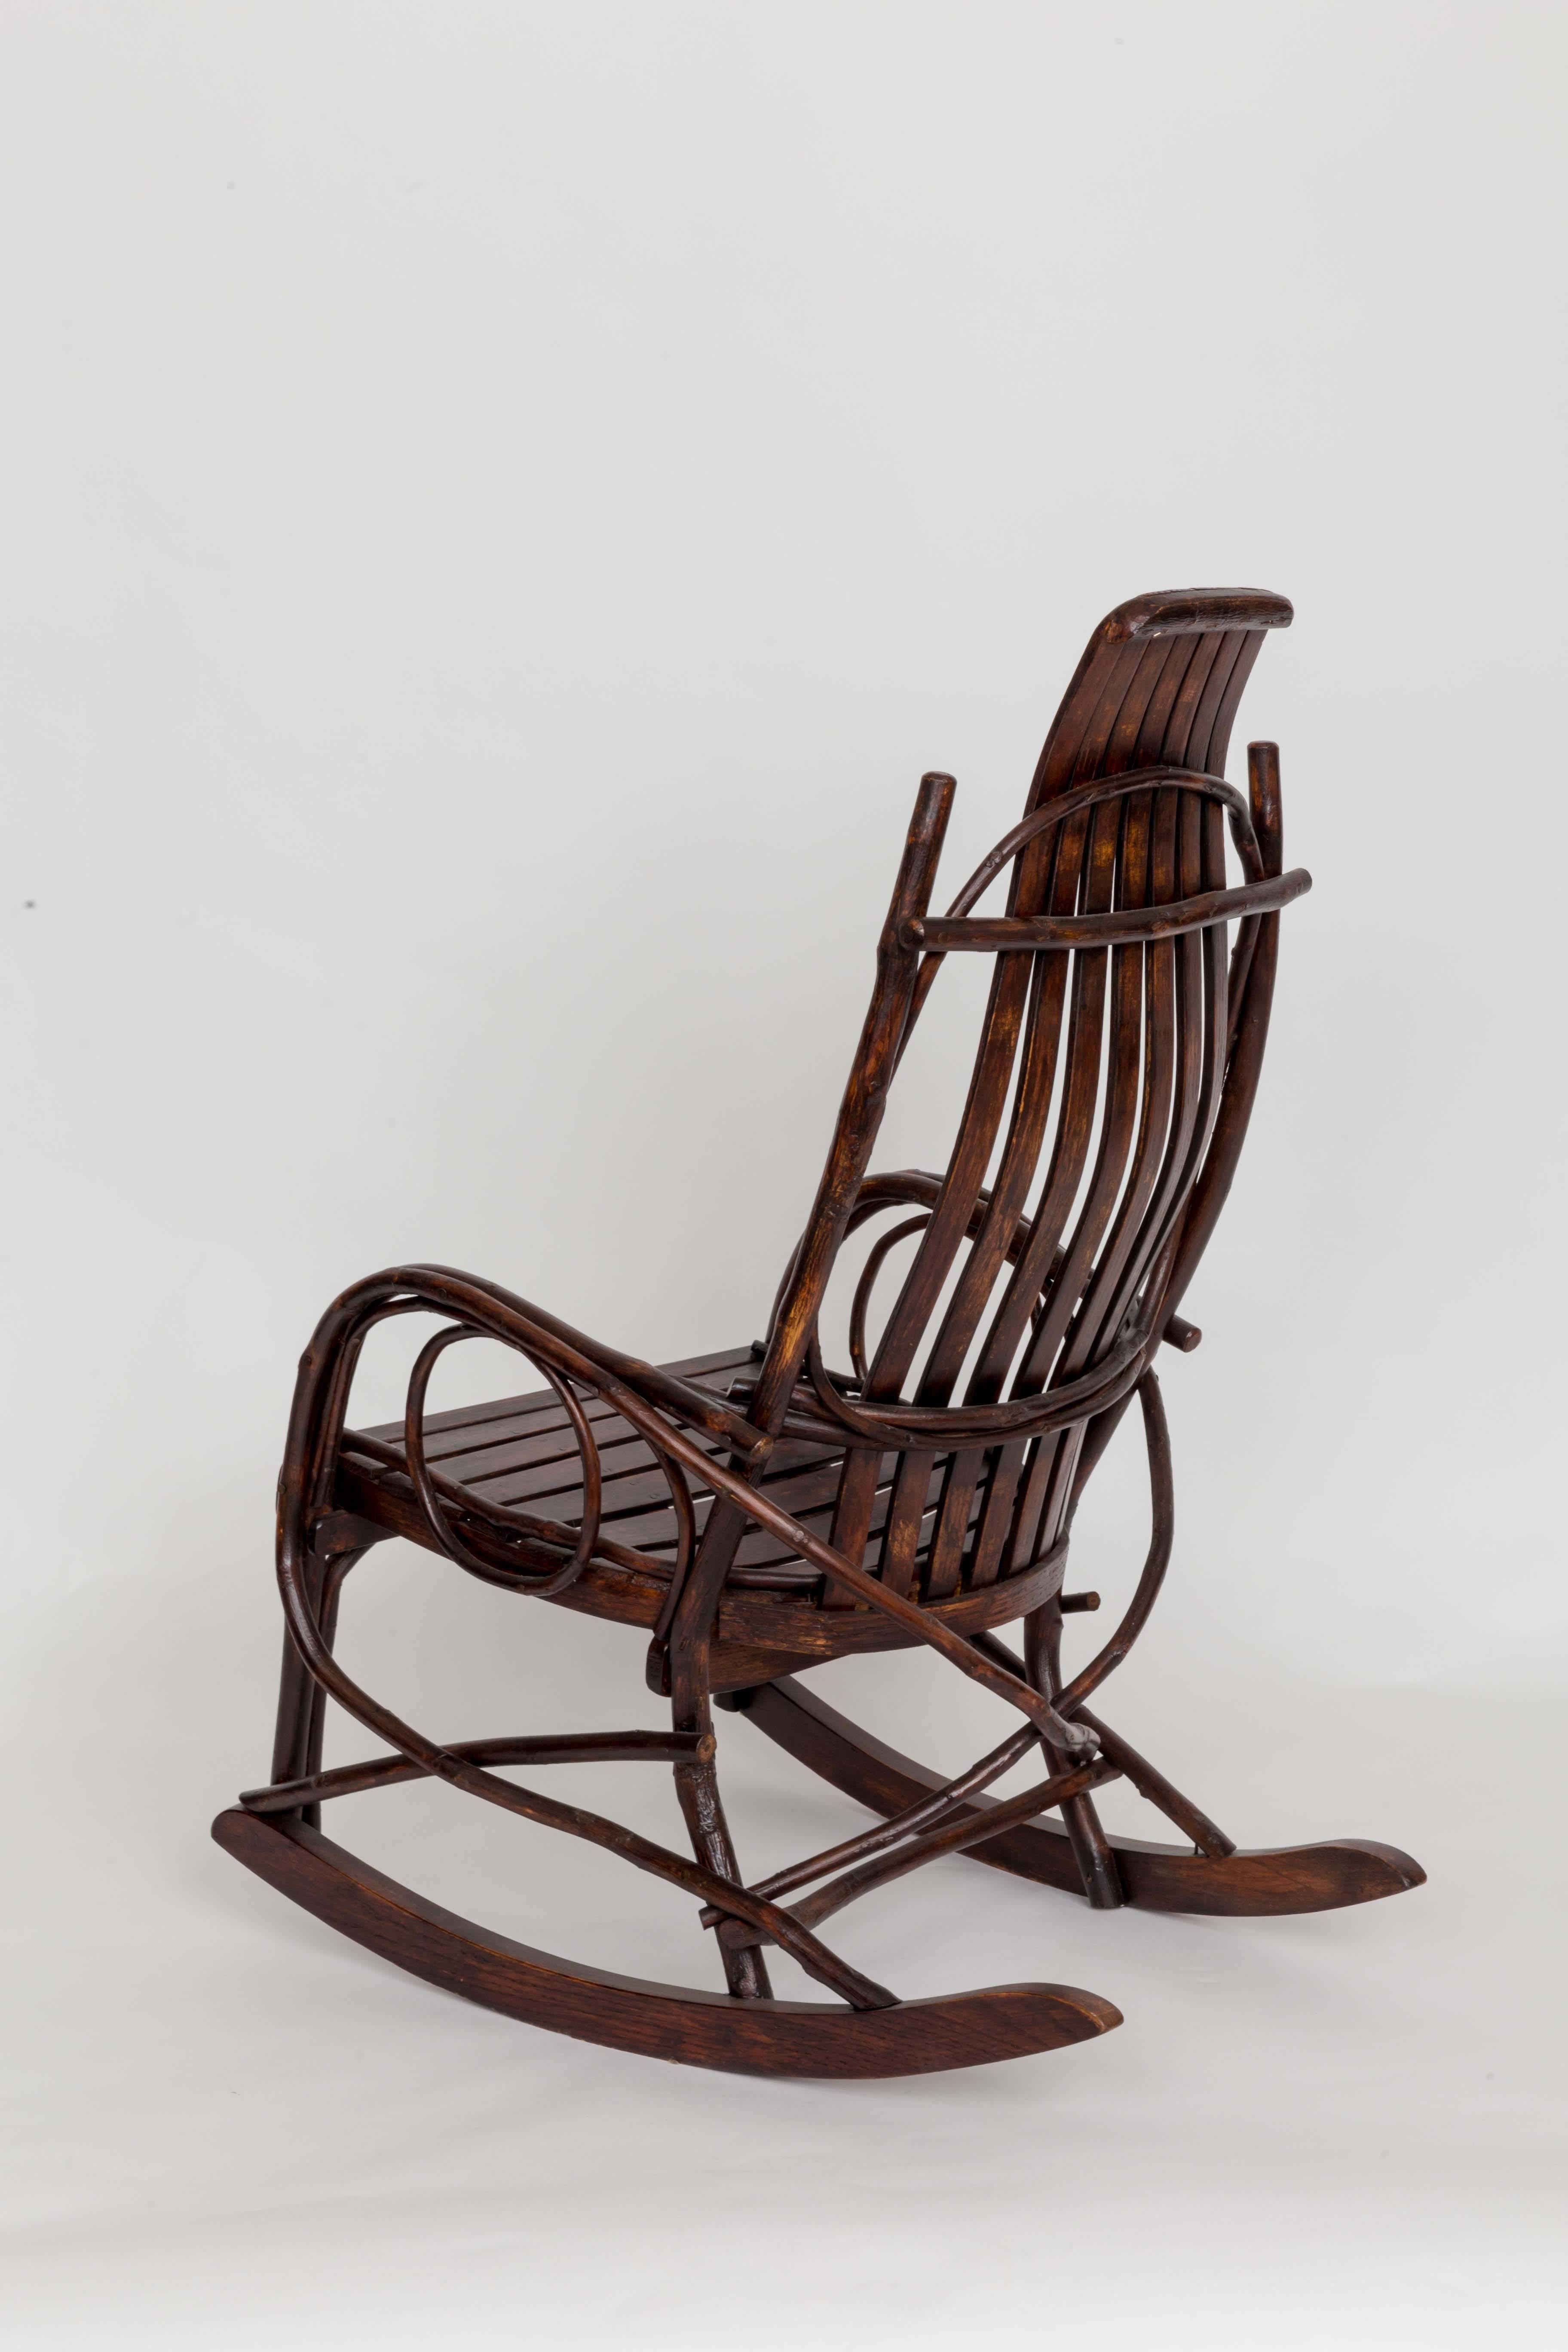 Early 20th-Century Adirondack Childs Rocker In Excellent Condition For Sale In New York City, NY